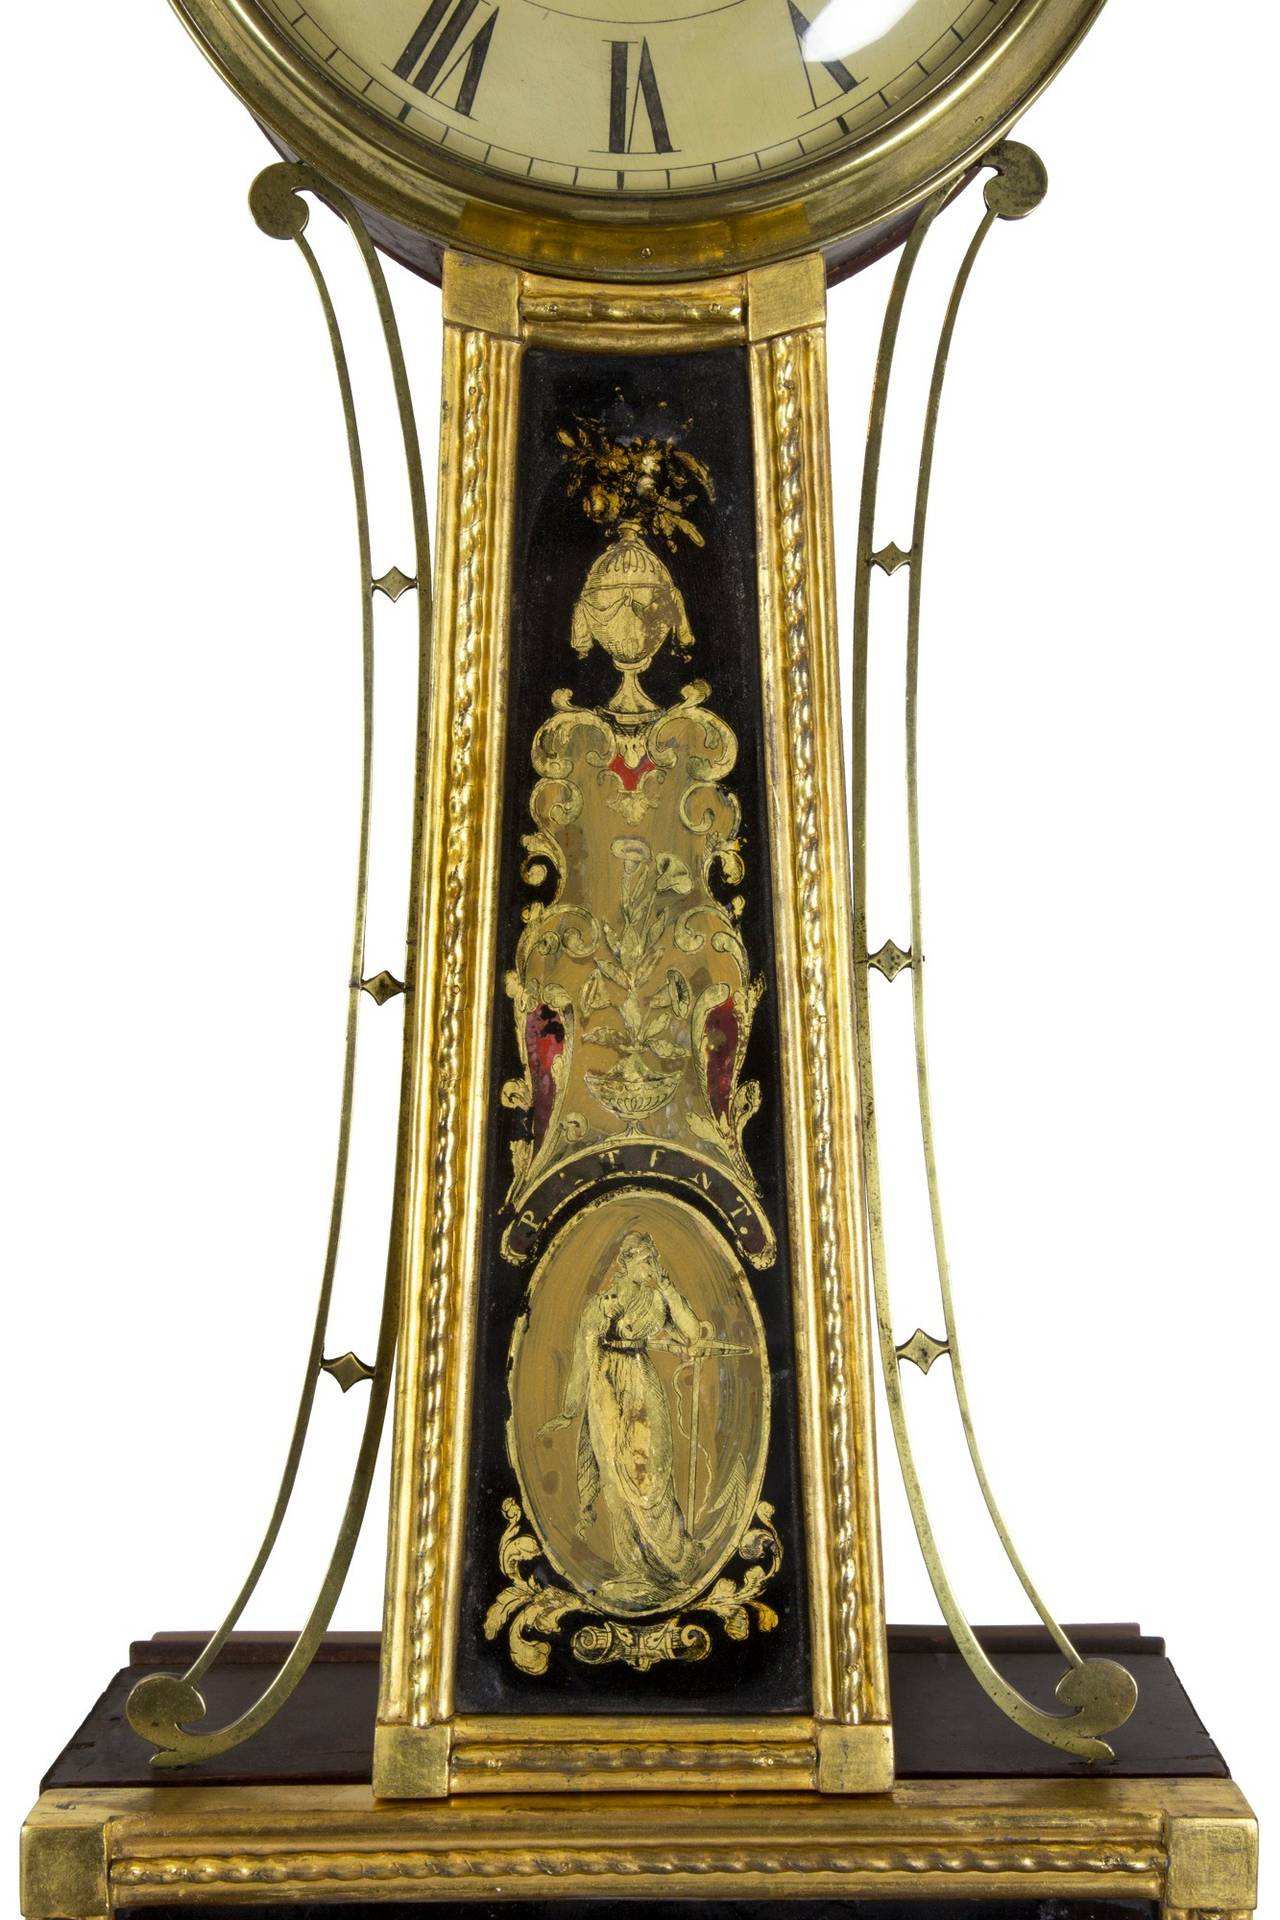 This clock has its original reverse paintings showing a dynamic naval battle, above a banner bearing the names of the four primary American naval heros of the War of 1812: Captain Isaac Hull, Stephen Decatur, William Bainbridge, and Jacob Jones. 